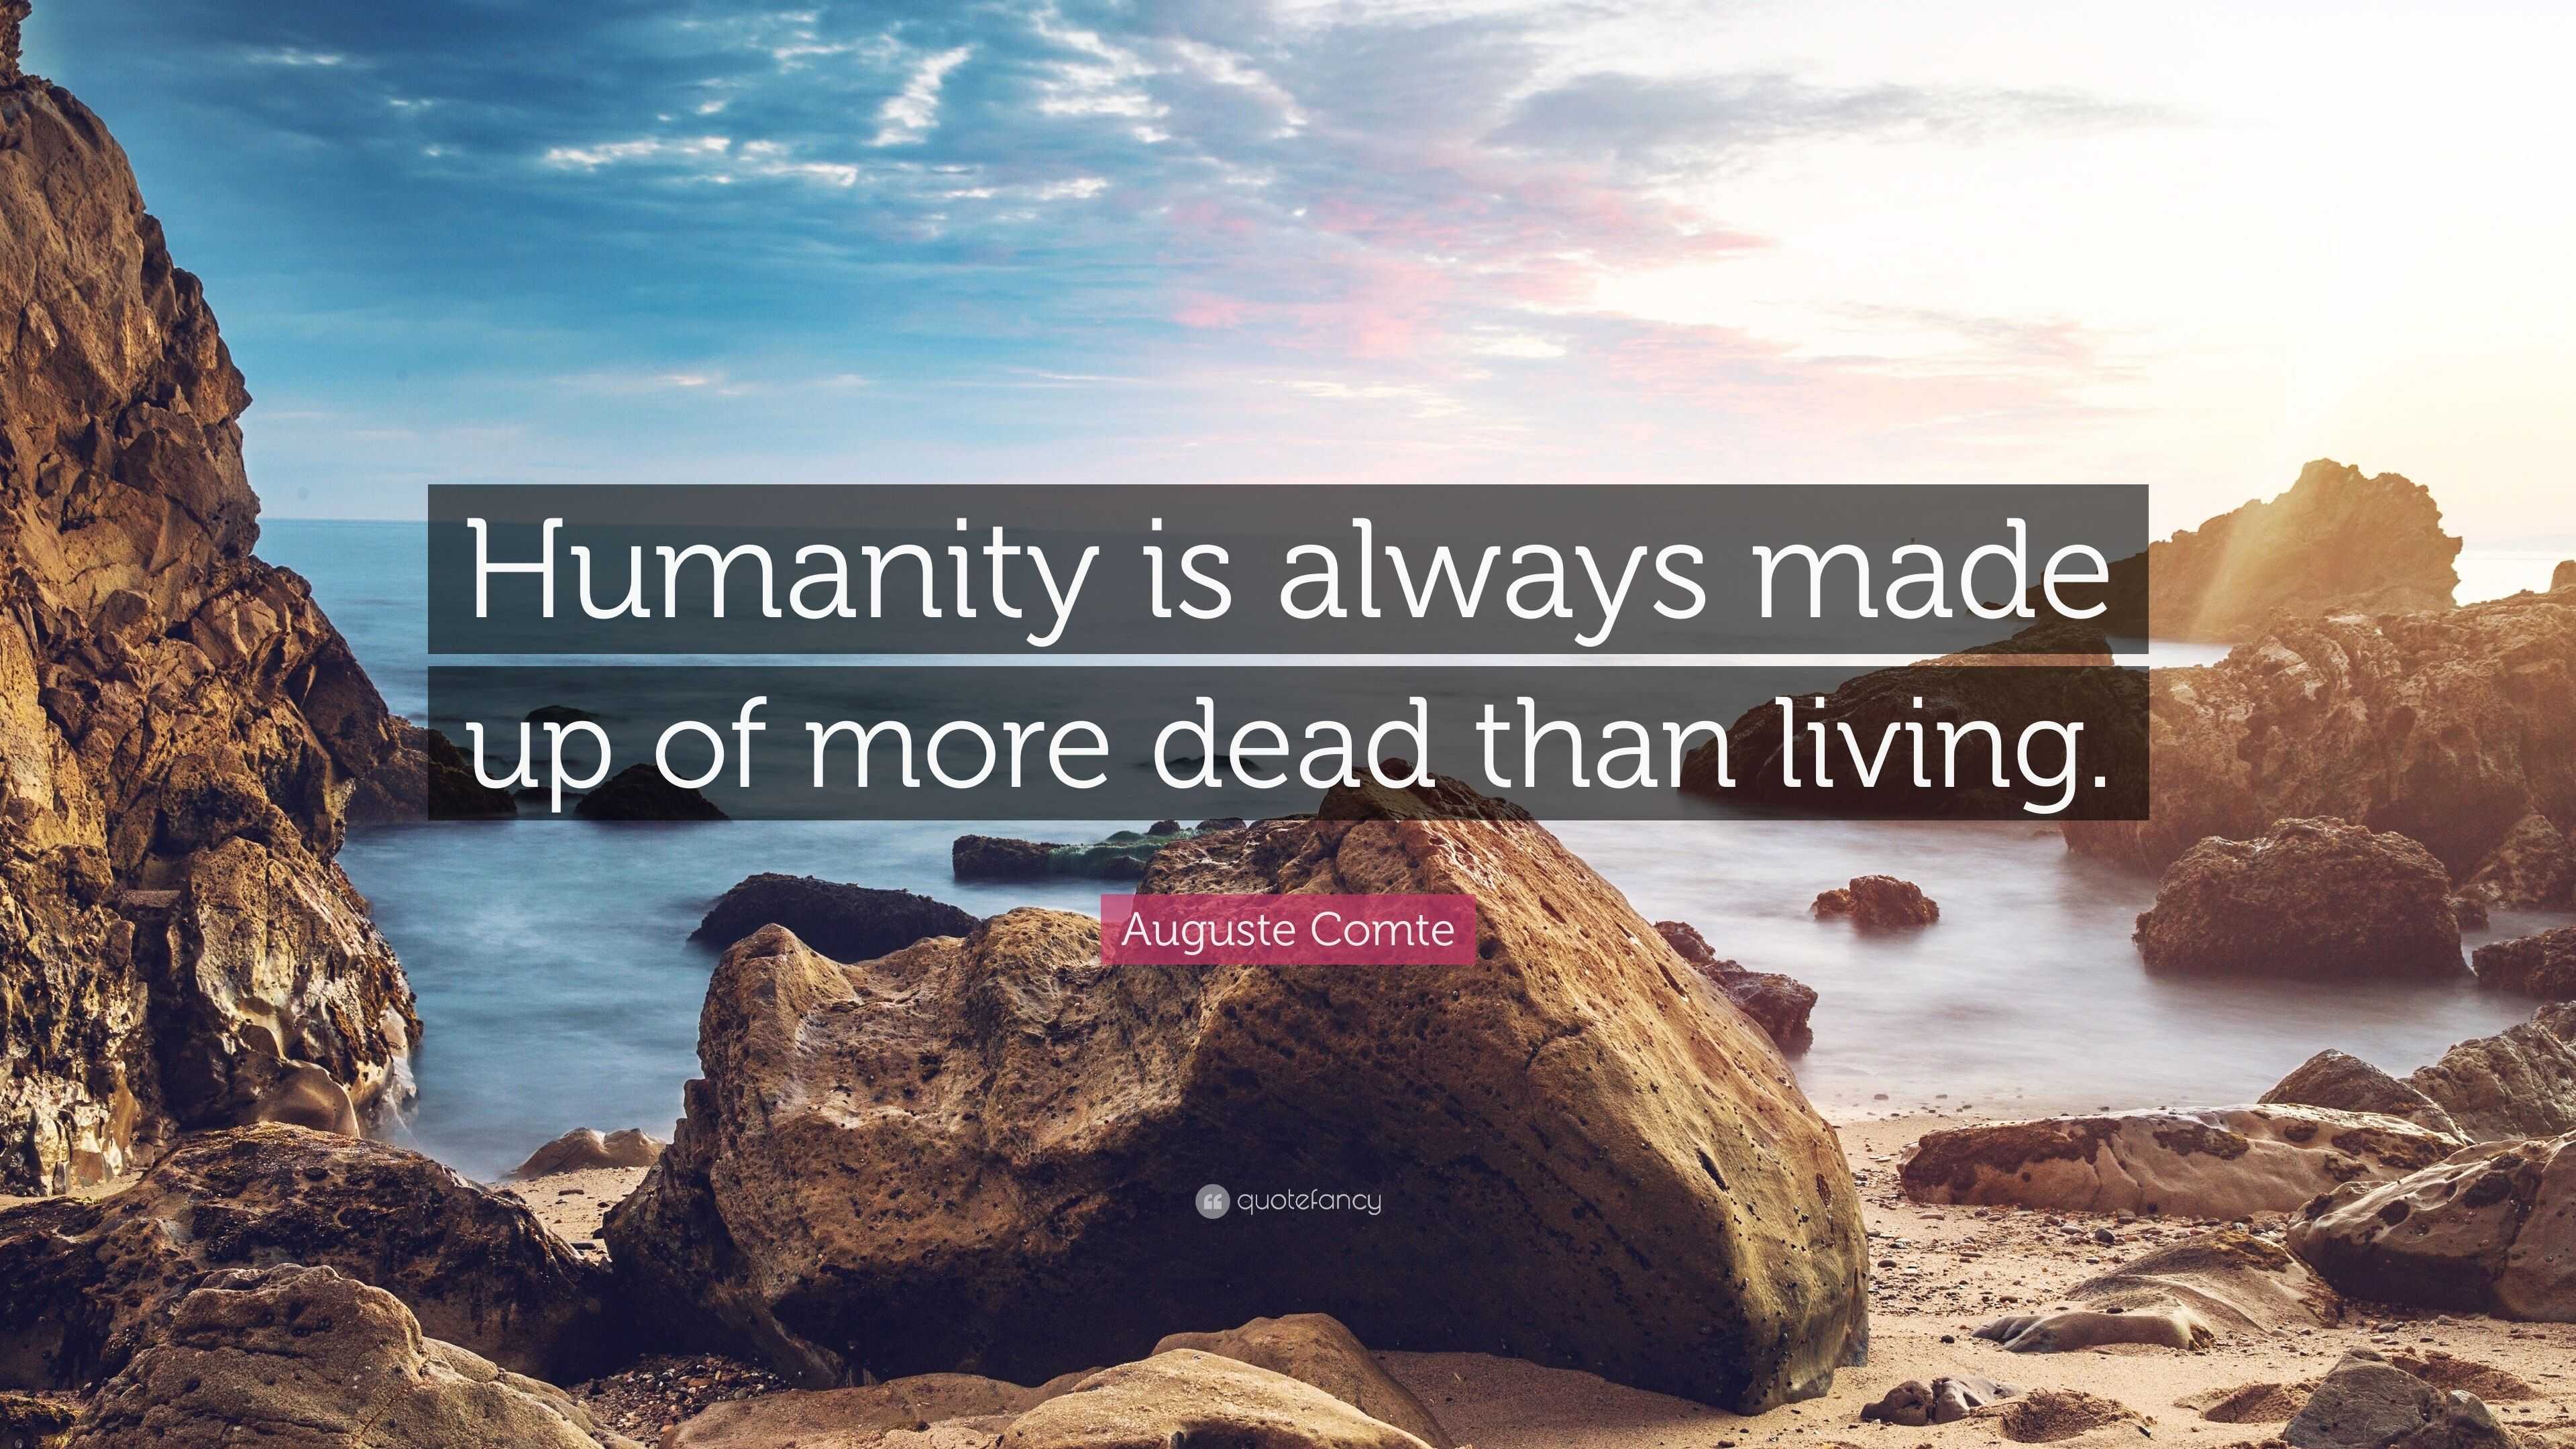 Auguste Quote: “Humanity is always made up more than living.”